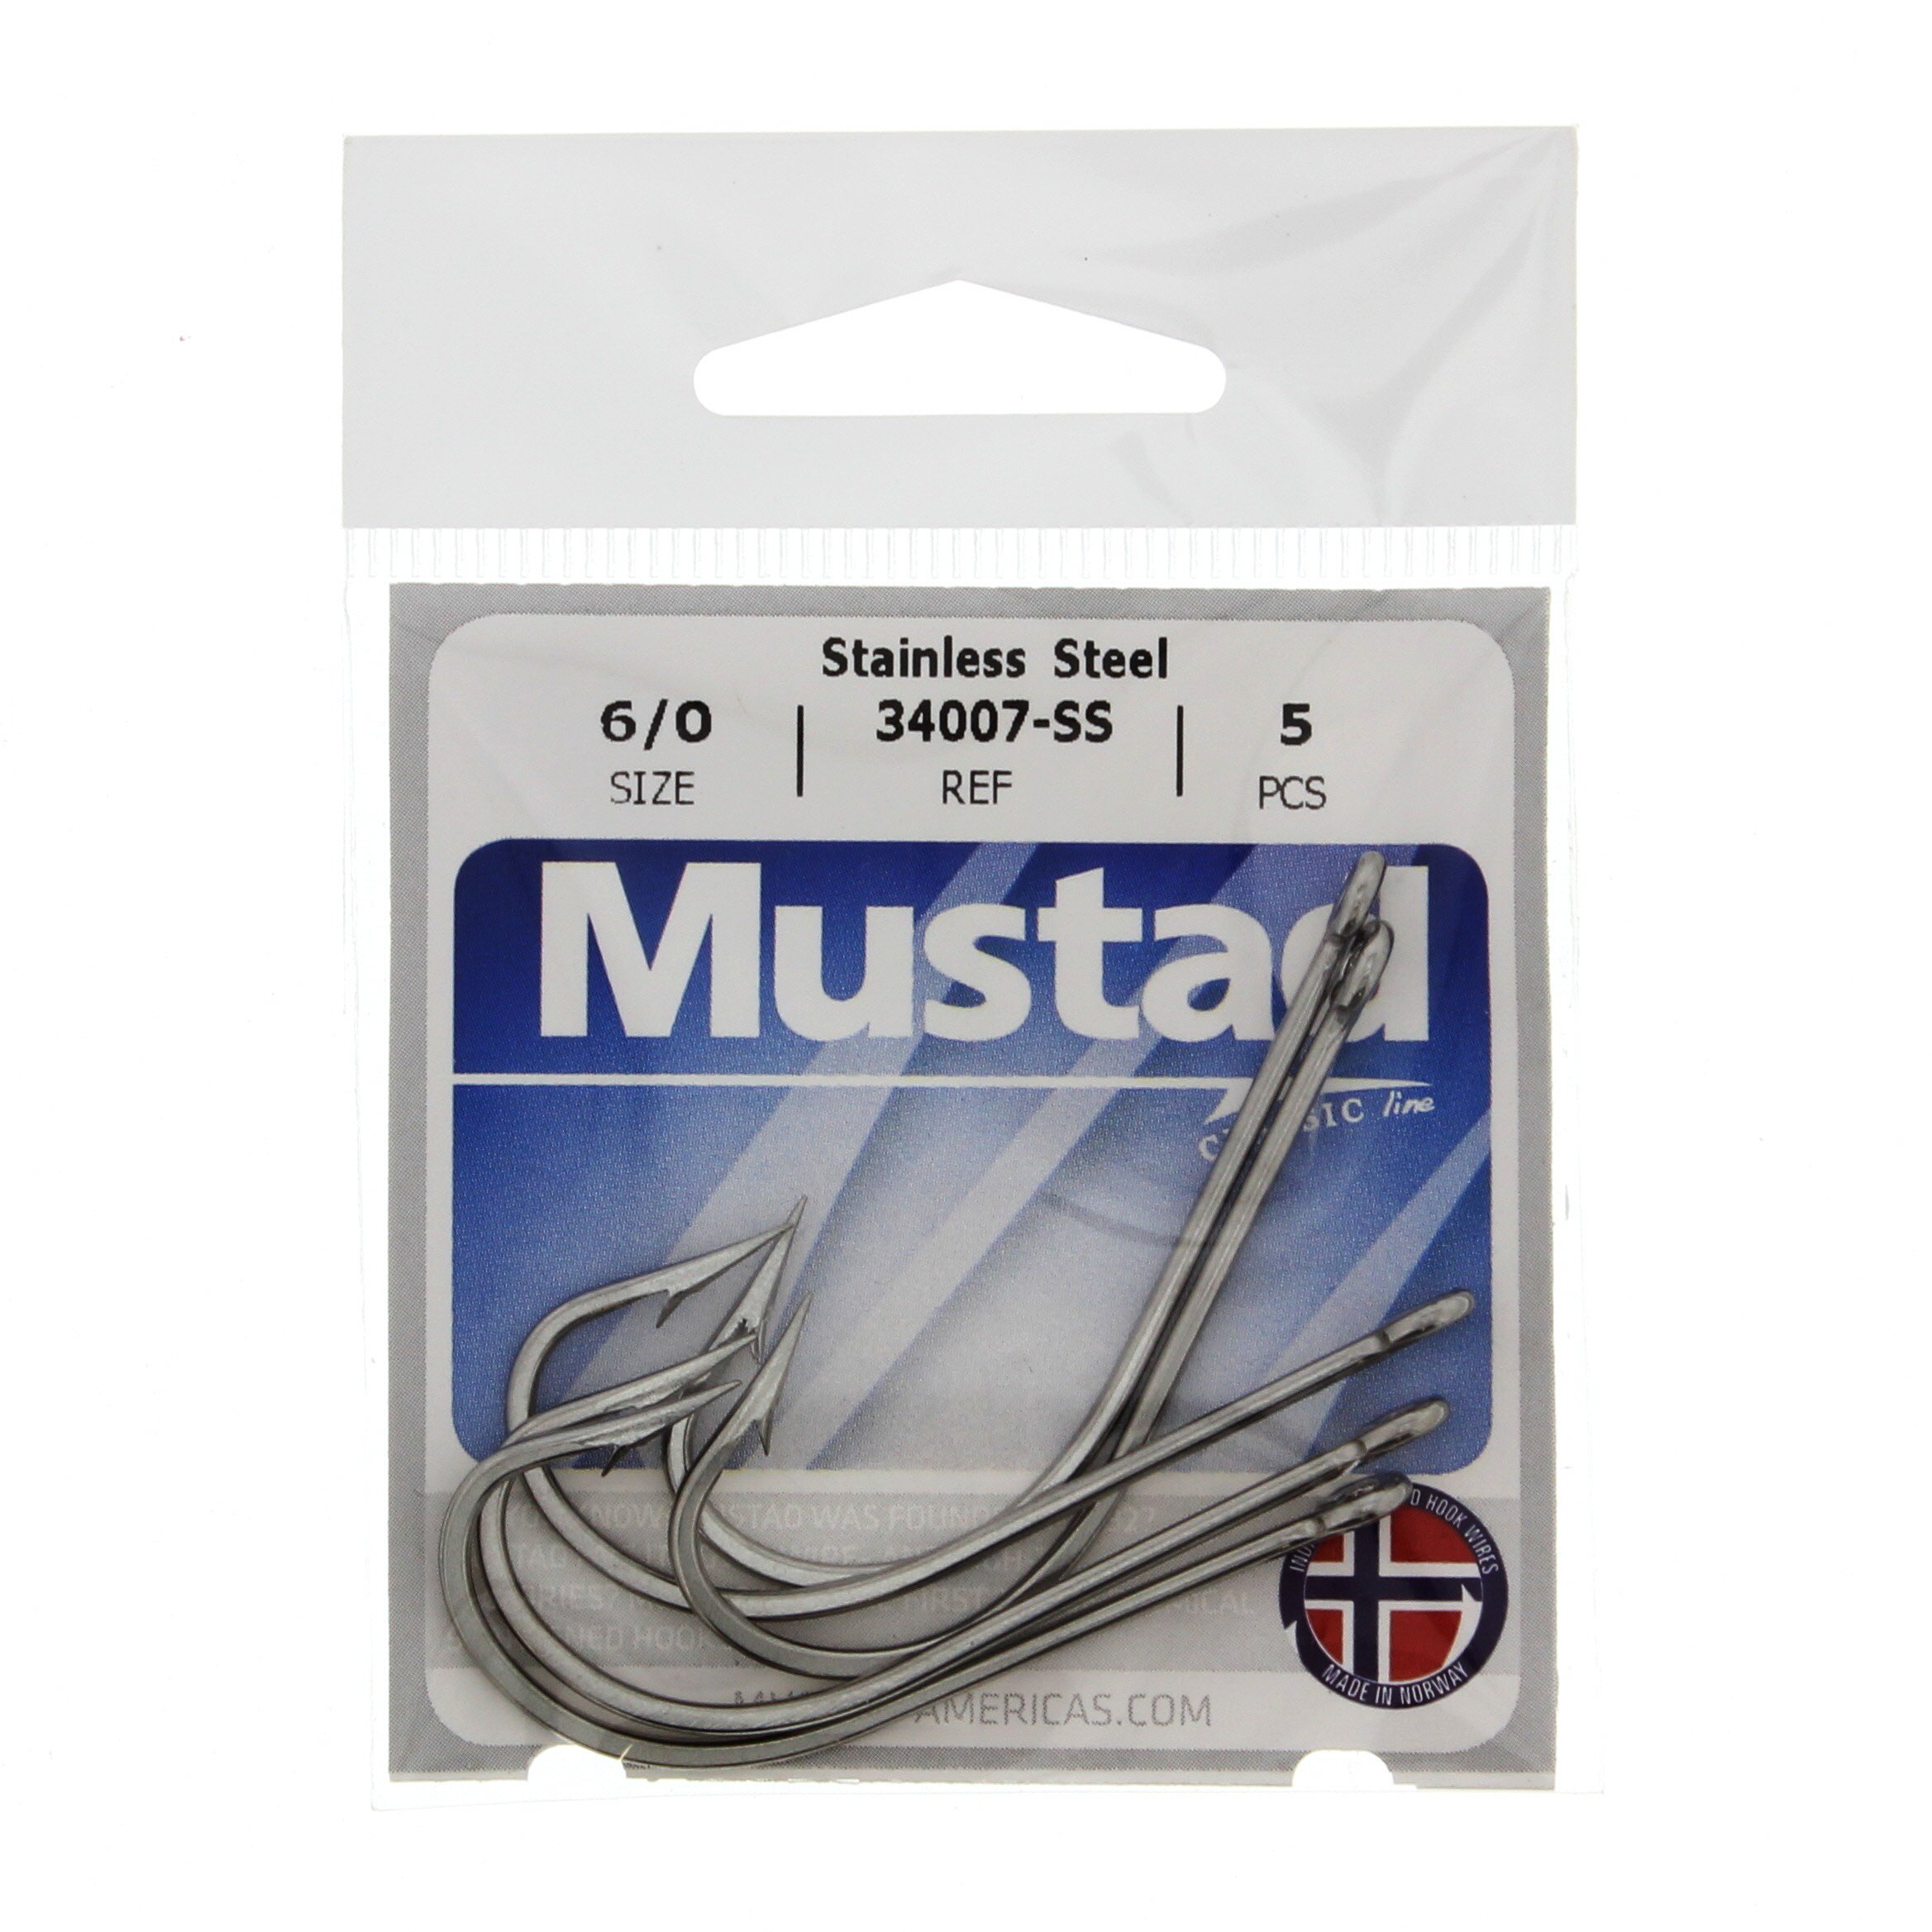 Mustad Stainless Steel 34007-SS Hooks, Size 6/0 - Shop Fishing at